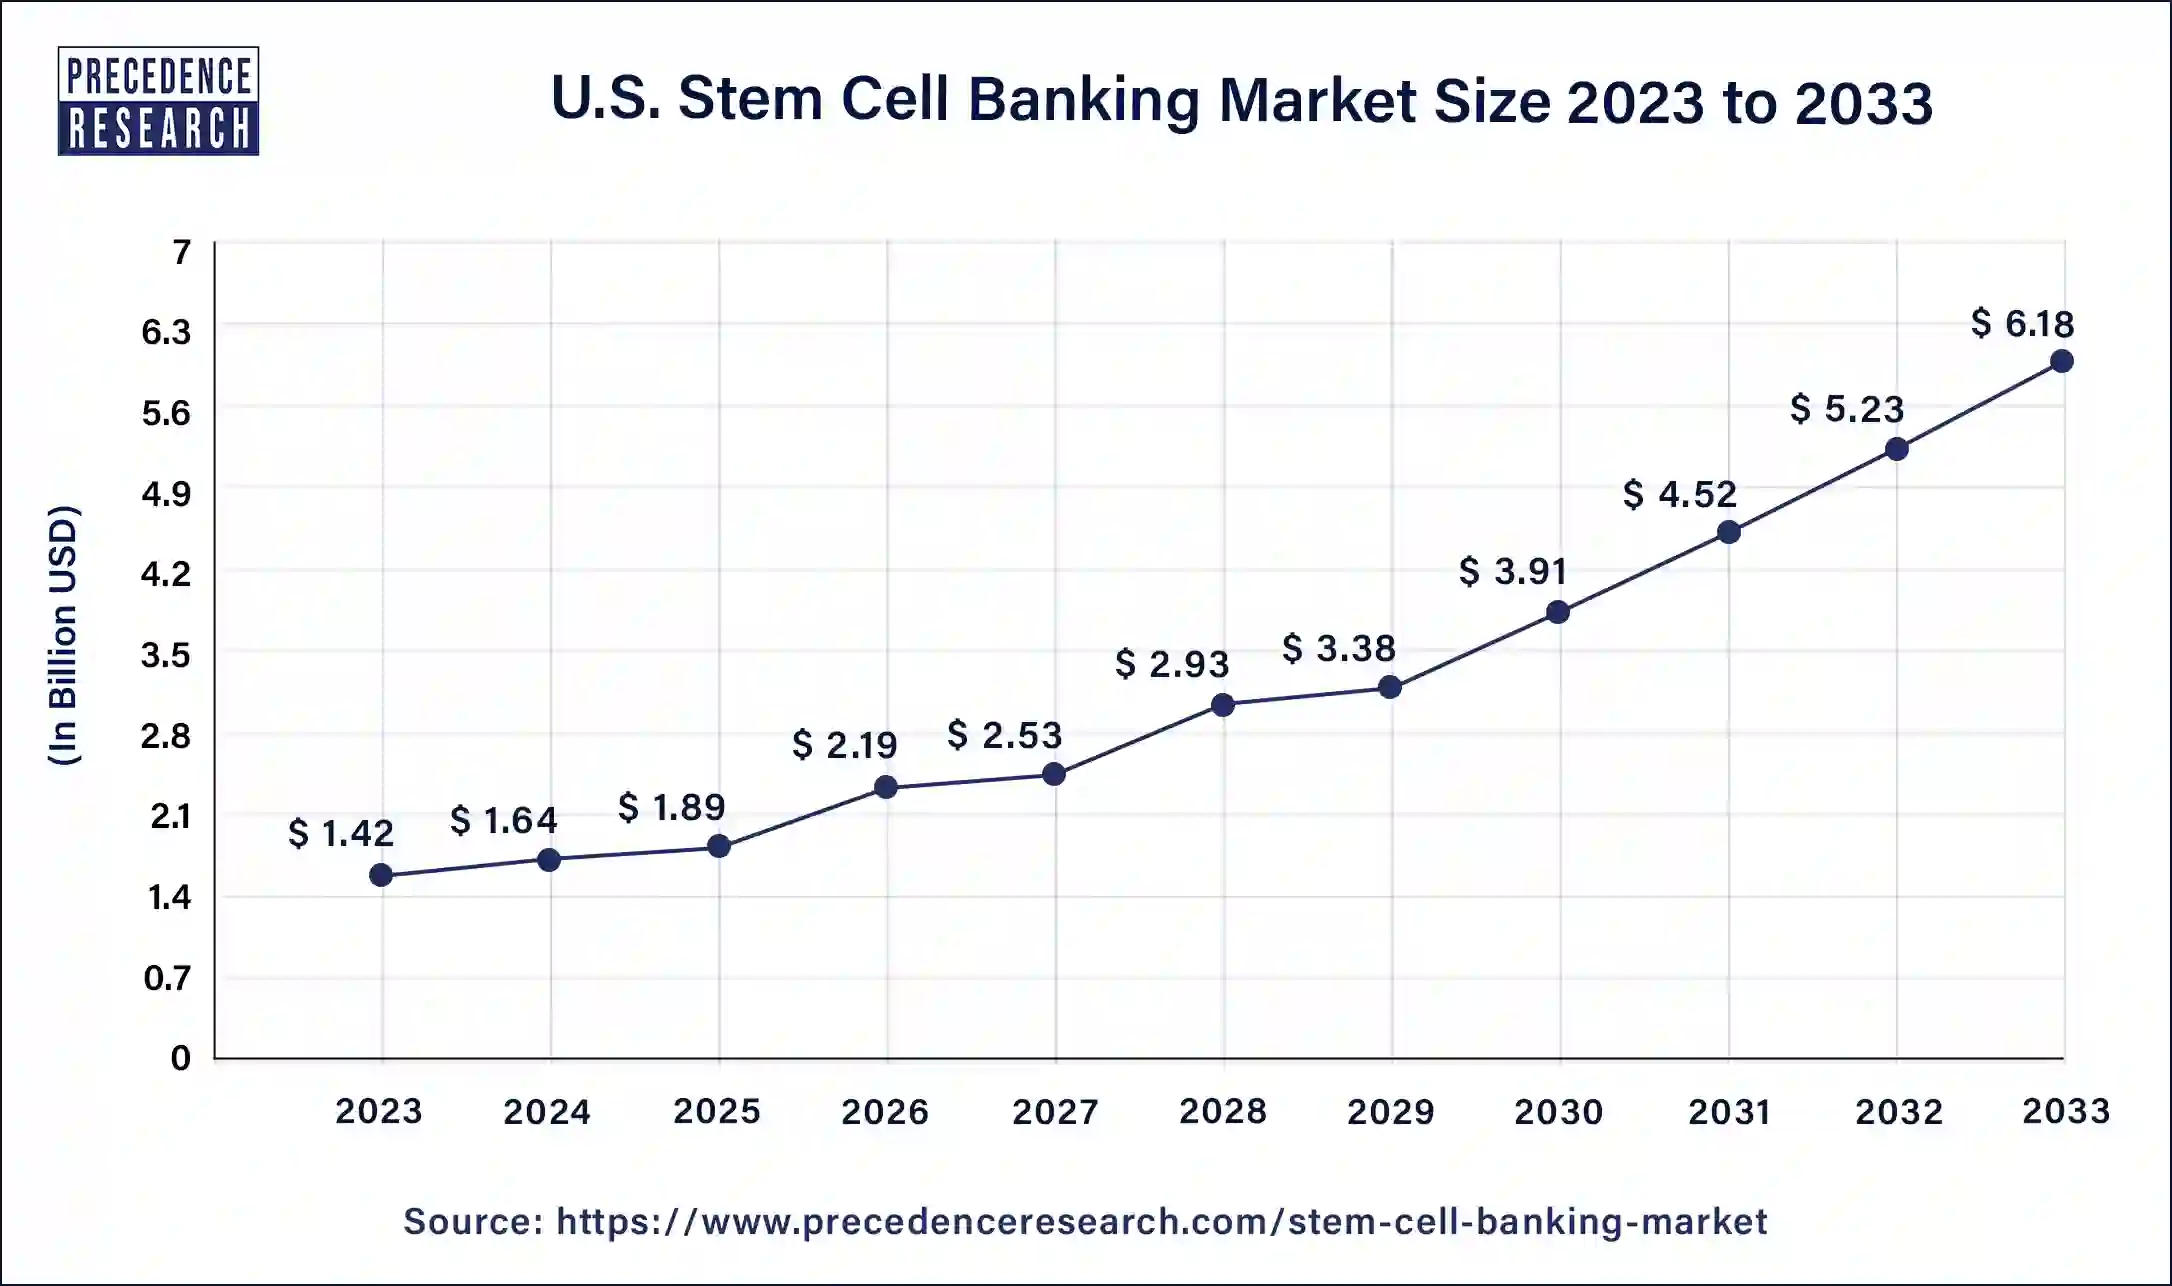 U.S. Stem Cell Banking Market Size 2024 to 2033